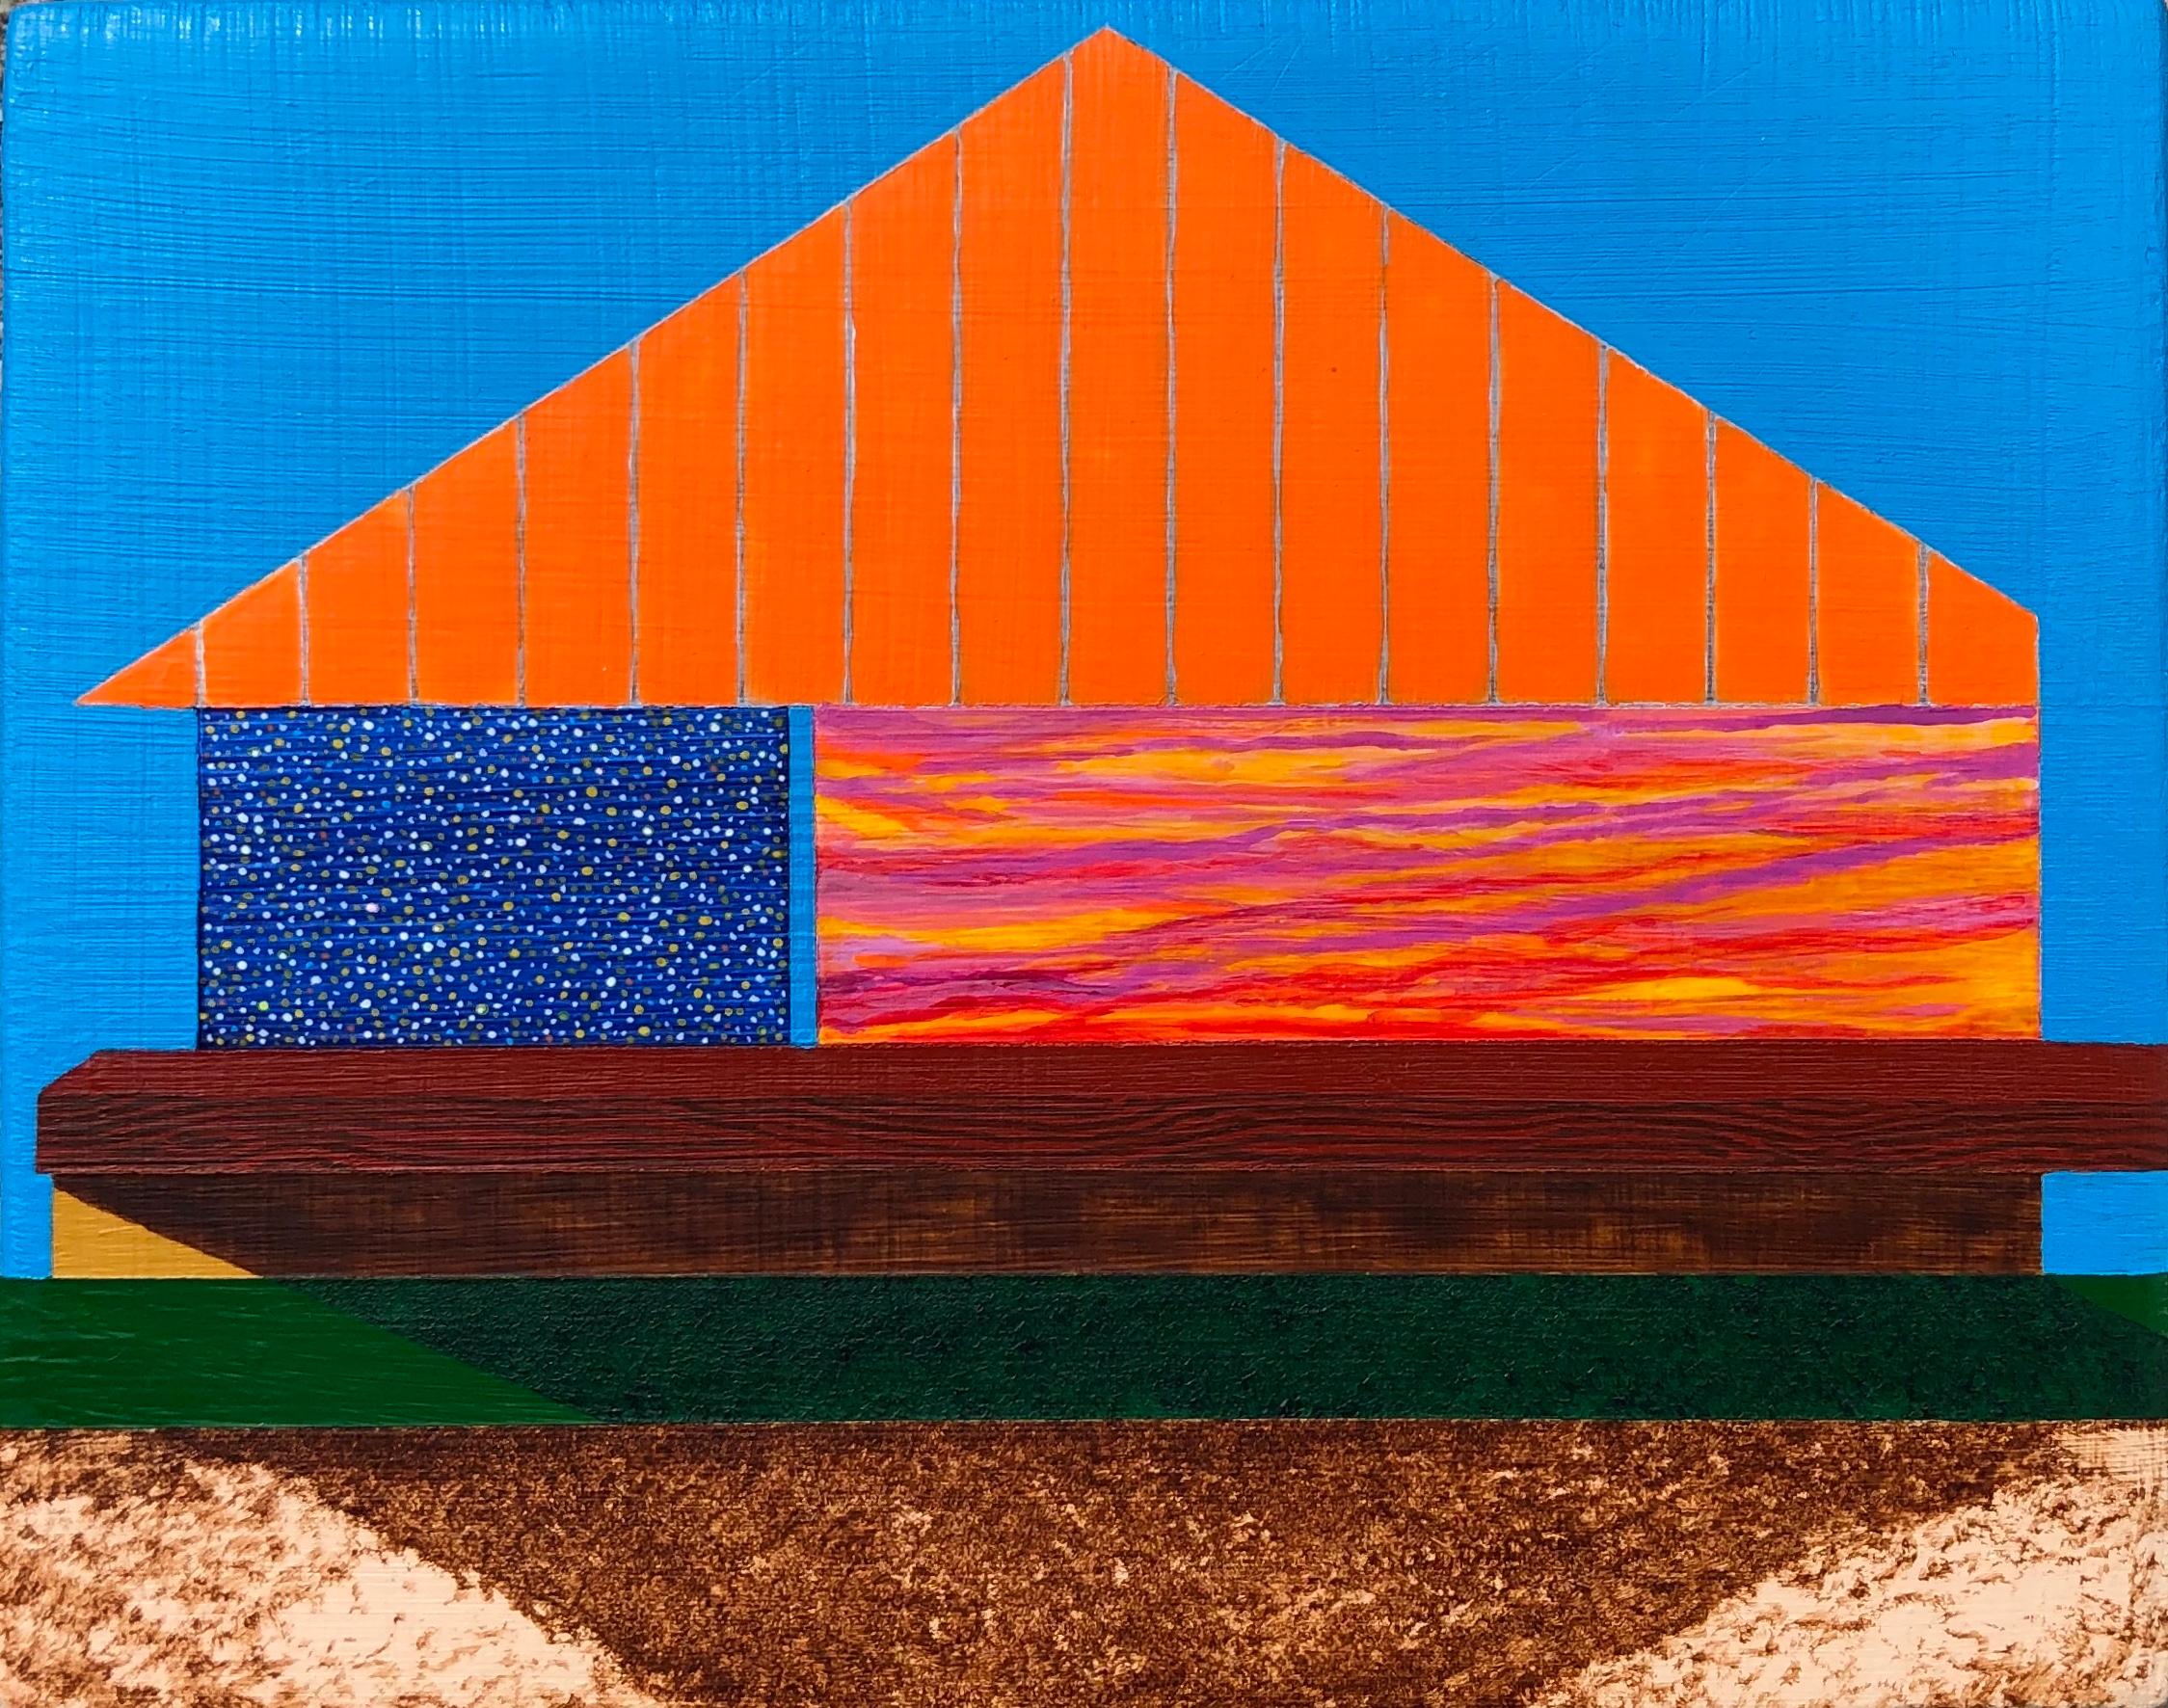 James Isherwood Interior Painting - Days of Future Past, small architectural painting on panel, blue and orange